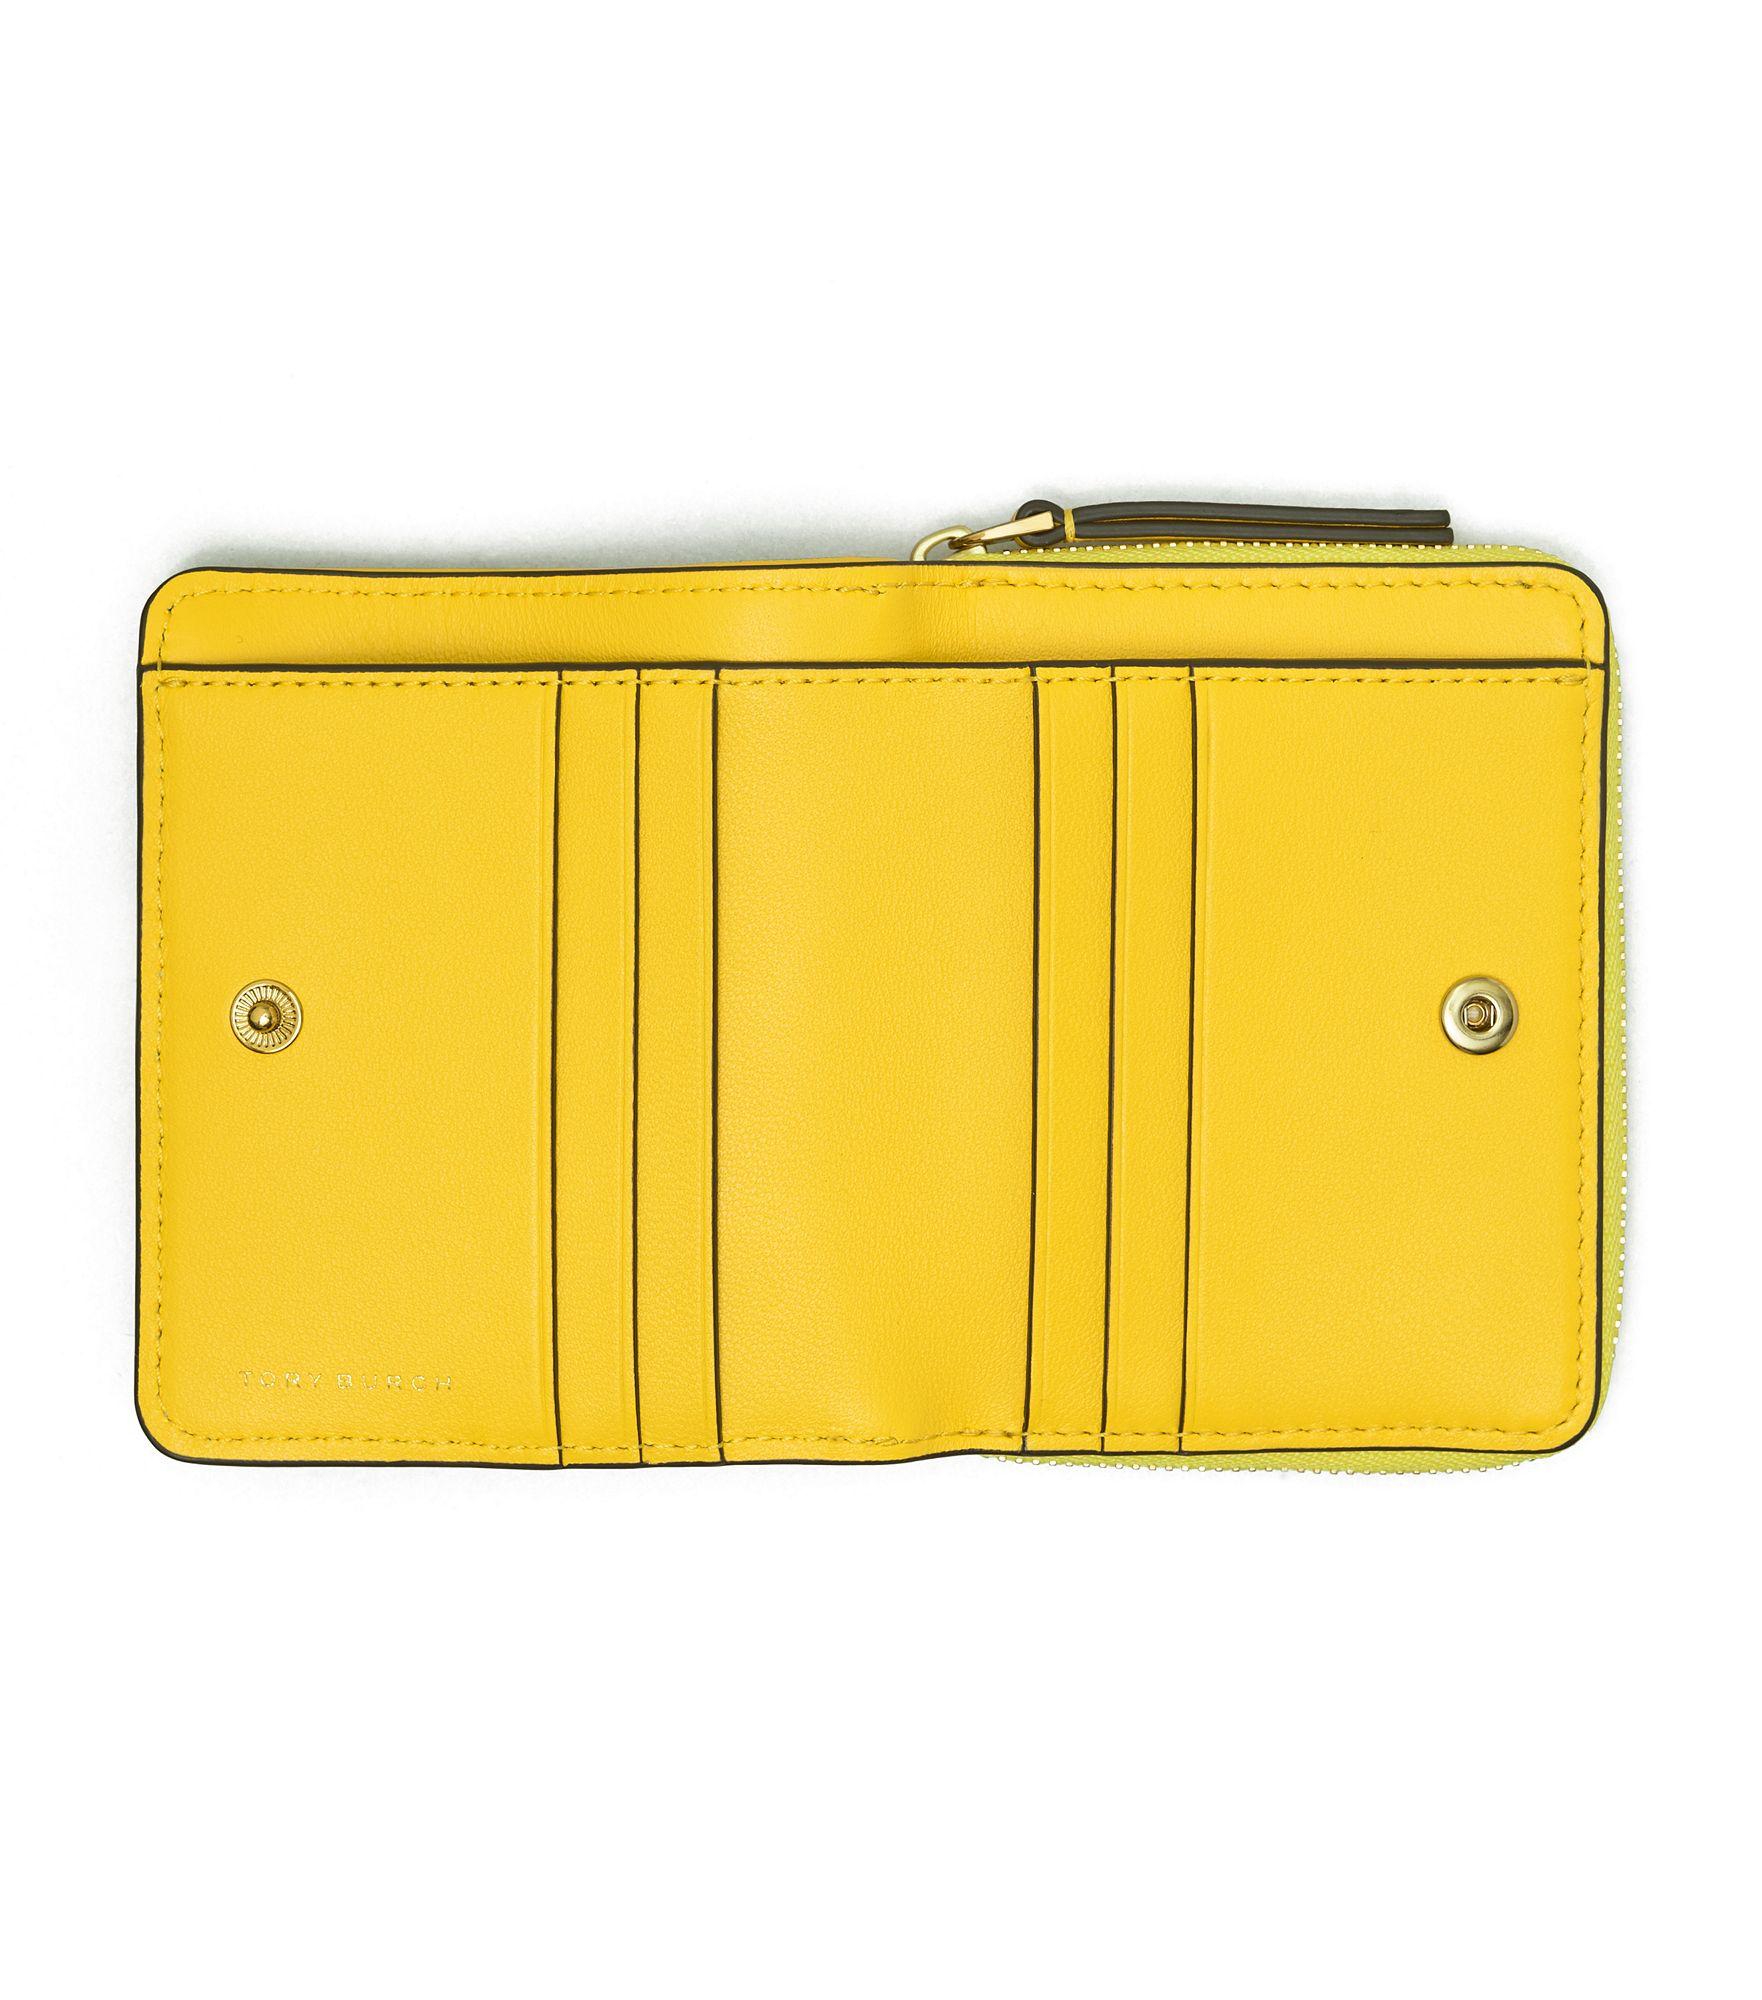 Tory Burch Leather Kira Zipped Wallet in Yellow | Lyst